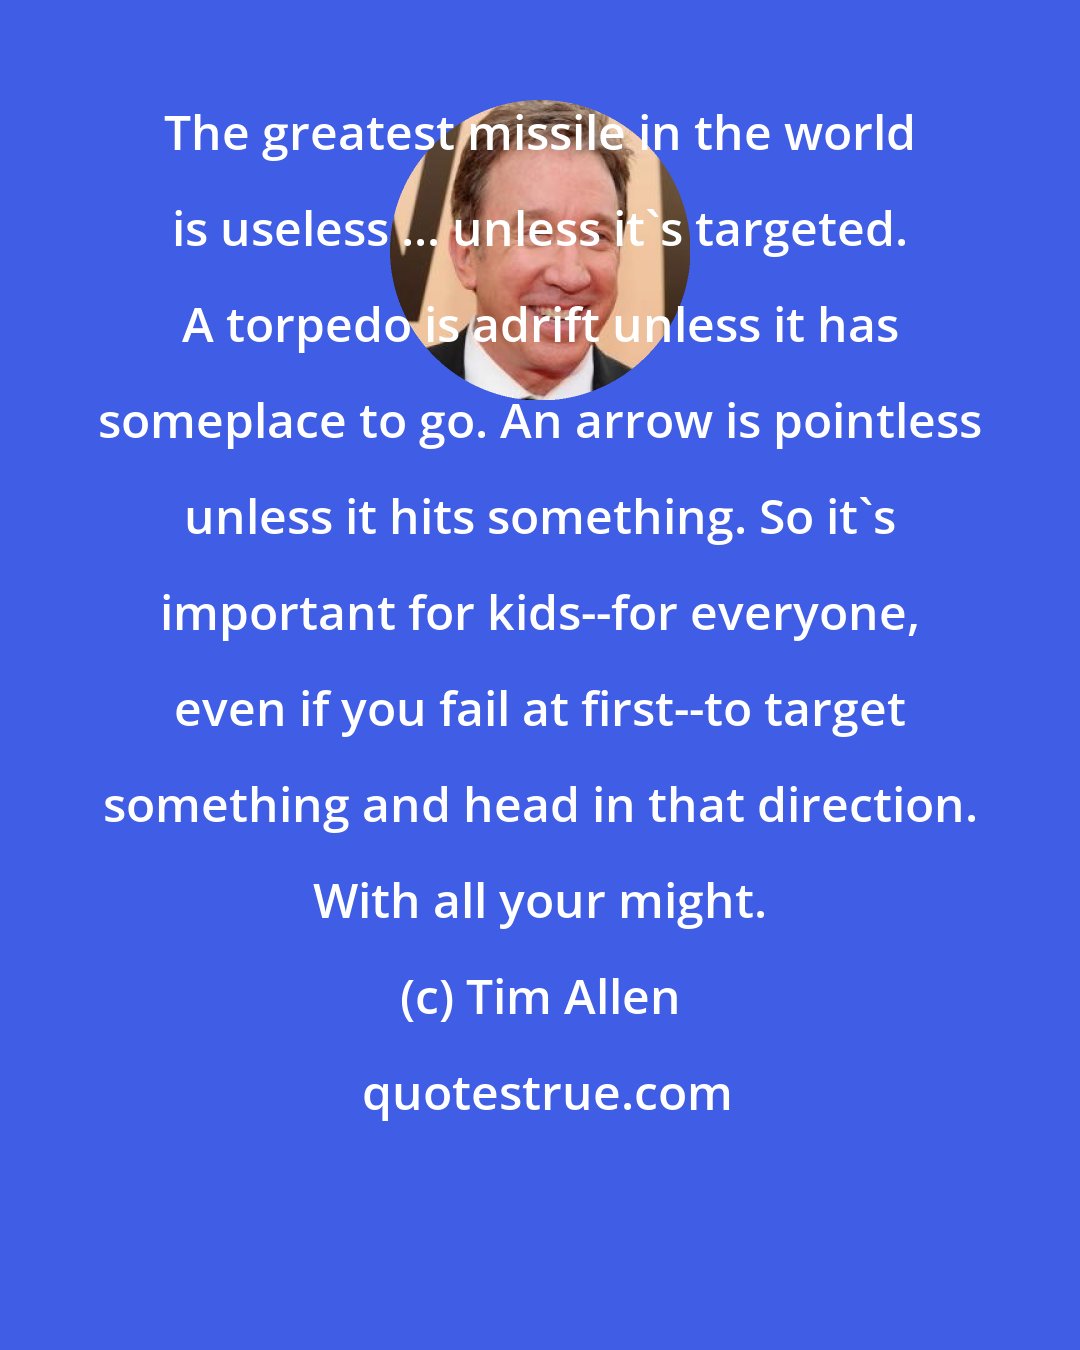 Tim Allen: The greatest missile in the world is useless ... unless it's targeted. A torpedo is adrift unless it has someplace to go. An arrow is pointless unless it hits something. So it's important for kids--for everyone, even if you fail at first--to target something and head in that direction. With all your might.